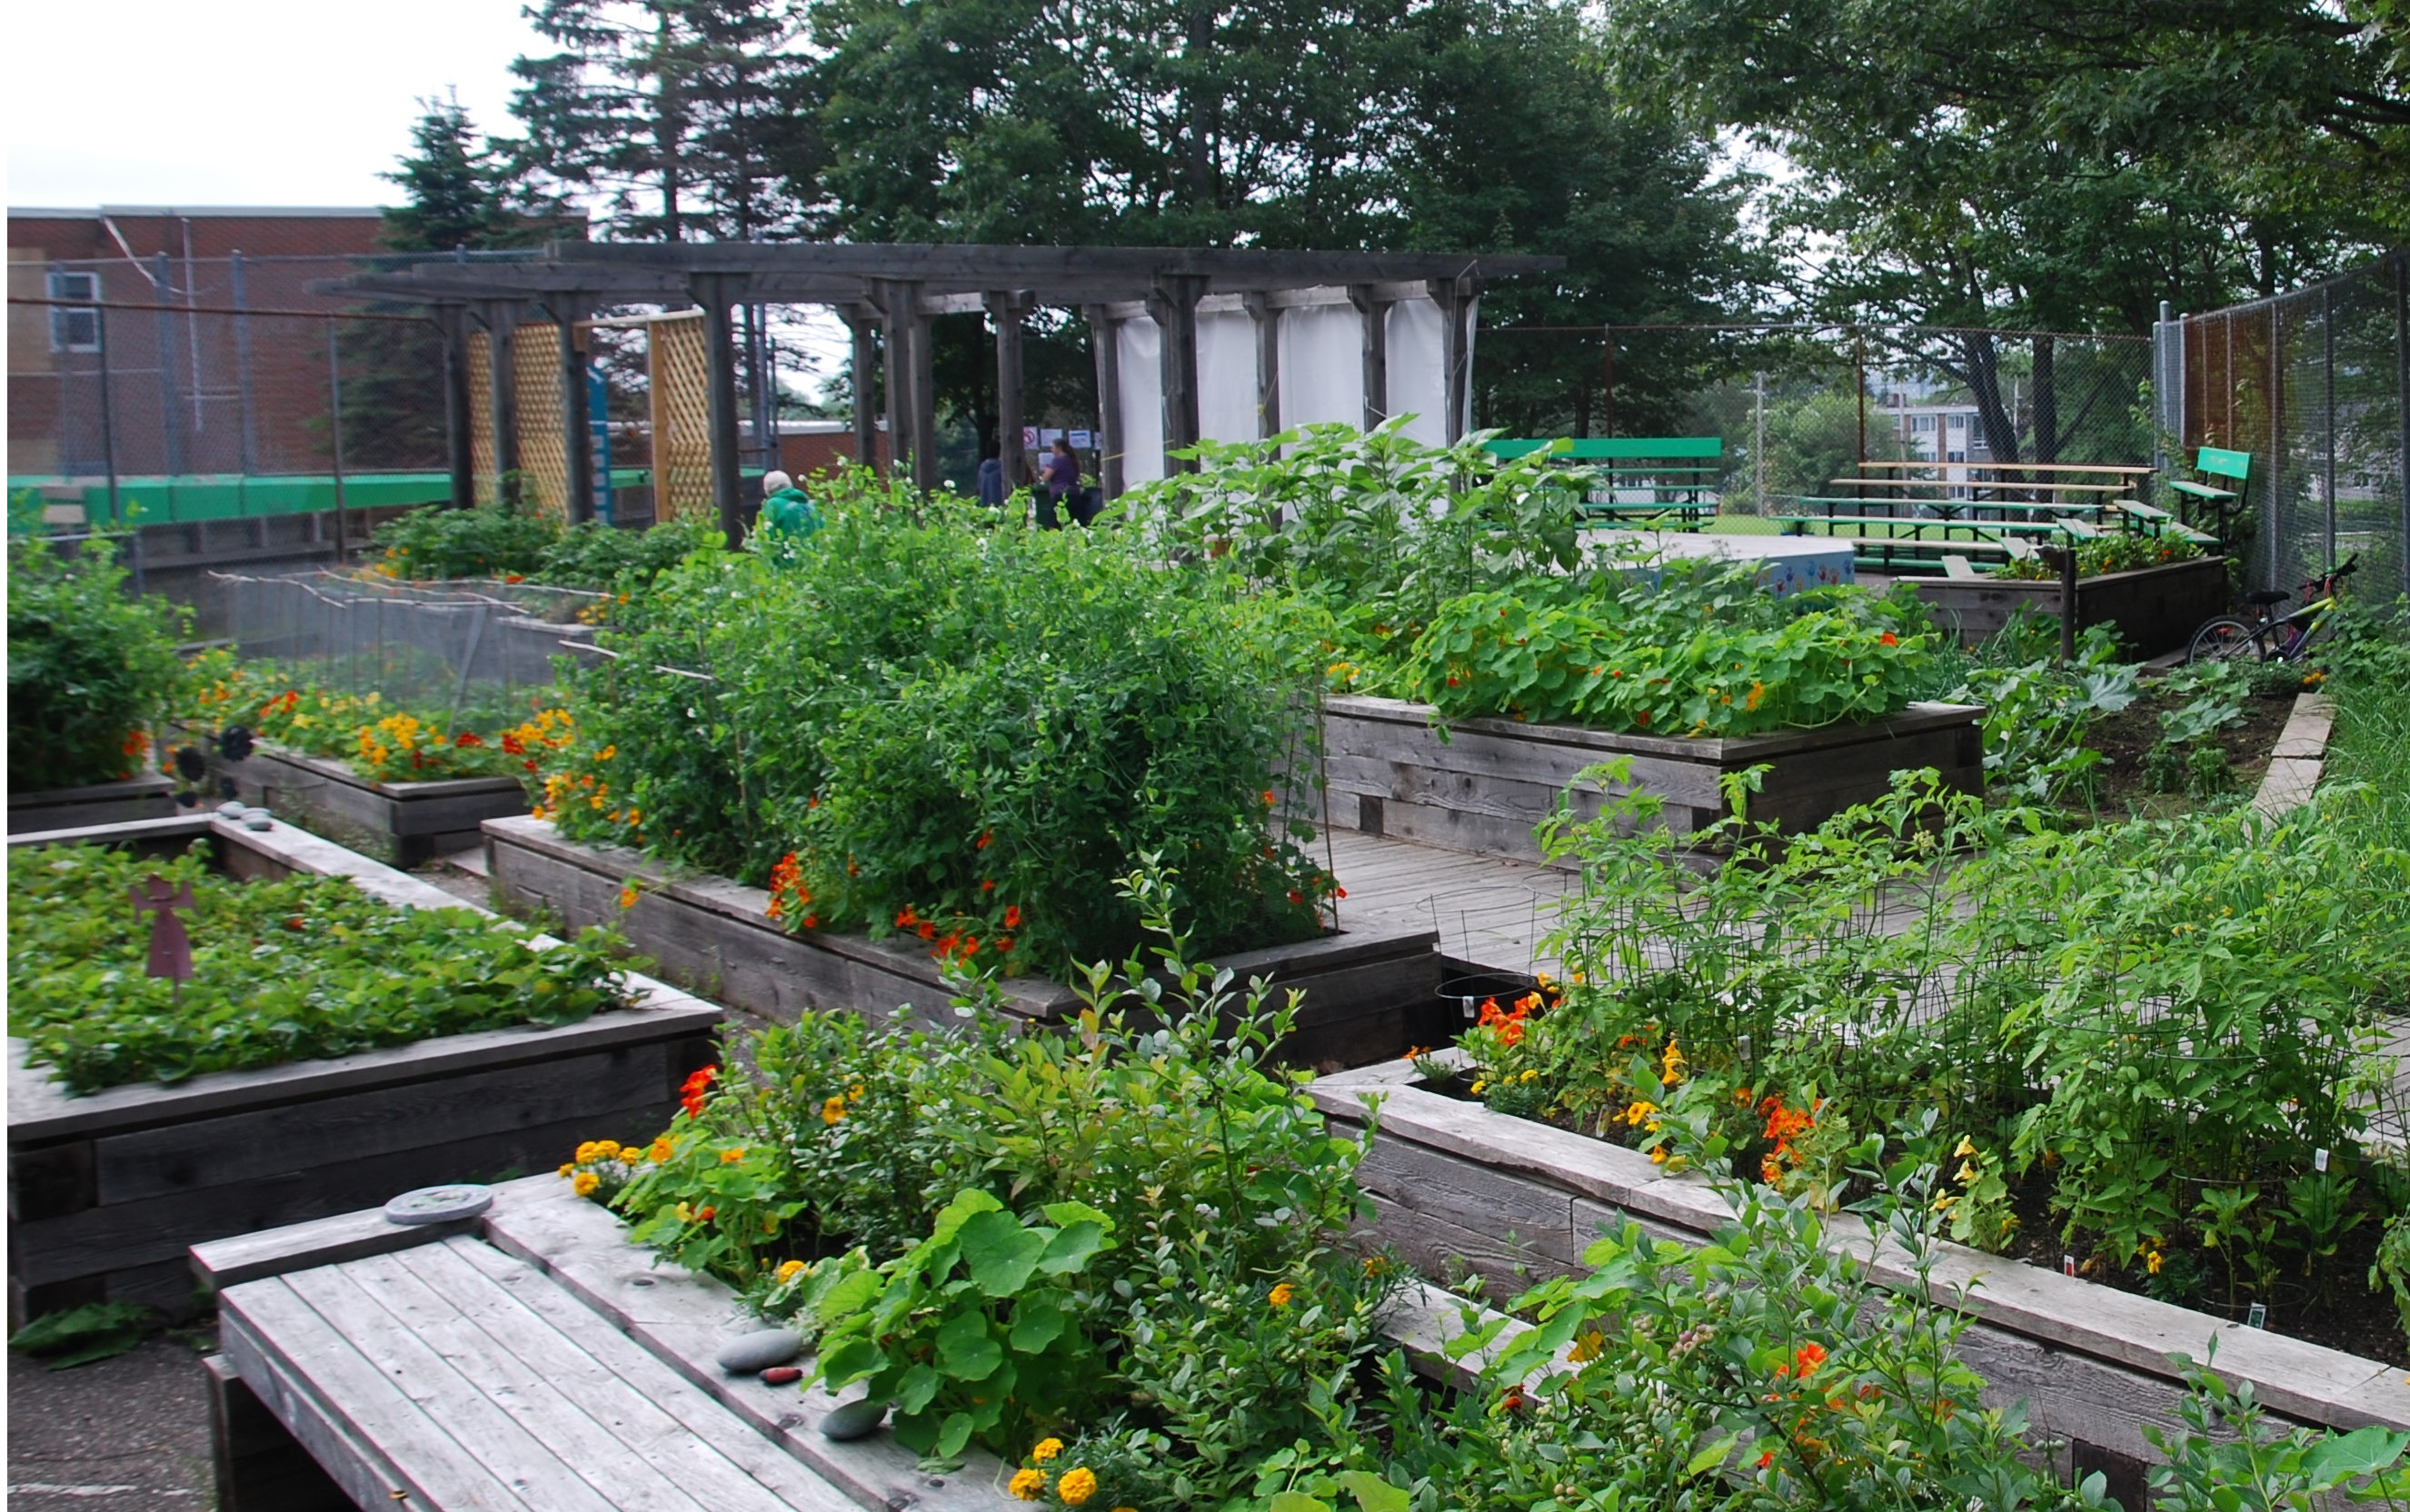 The Take Action Society community garden in Dartmouth North